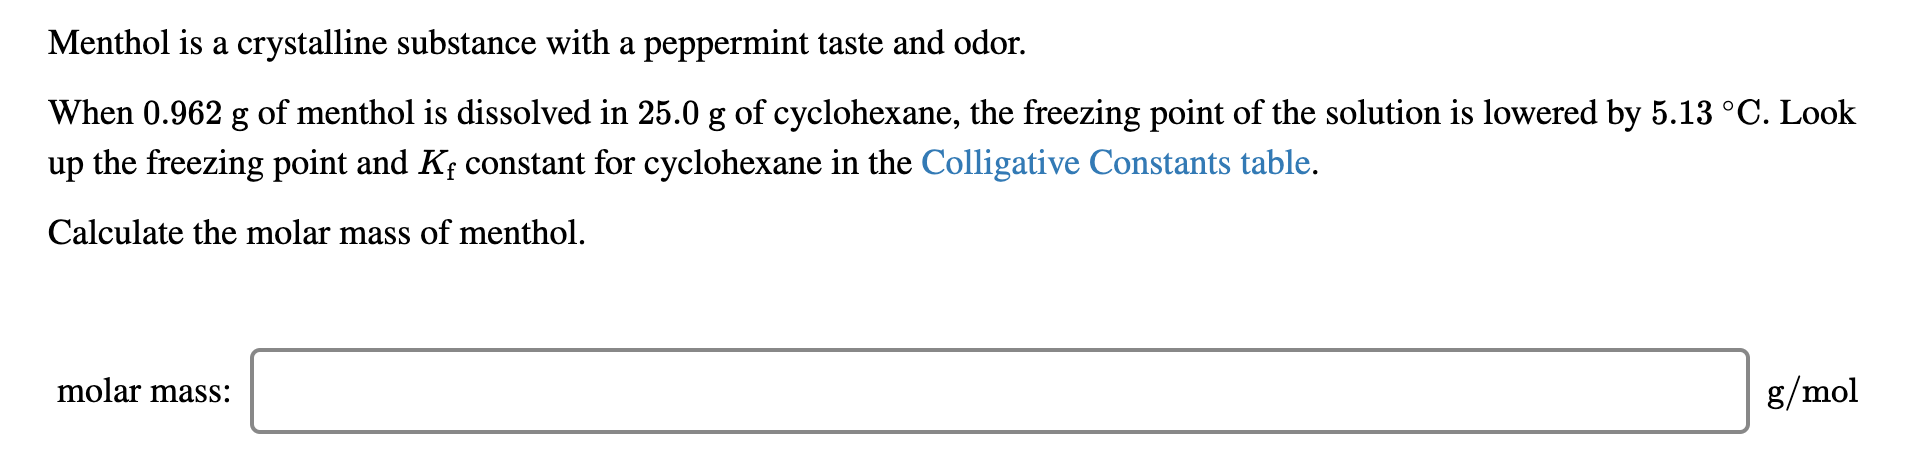 Menthol is a crystalline substance with a peppermint taste and odor.
When 0.962 g of menthol is dissolved in 25.0 g of cyclohexane, the freezing point of the solution is lowered by 5.13 °C. Look
up the freezing point and Kf constant for cyclohexane in the Colligative Constants table.
Calculate the molar mass of menthol.
molar mass:
g/mol
